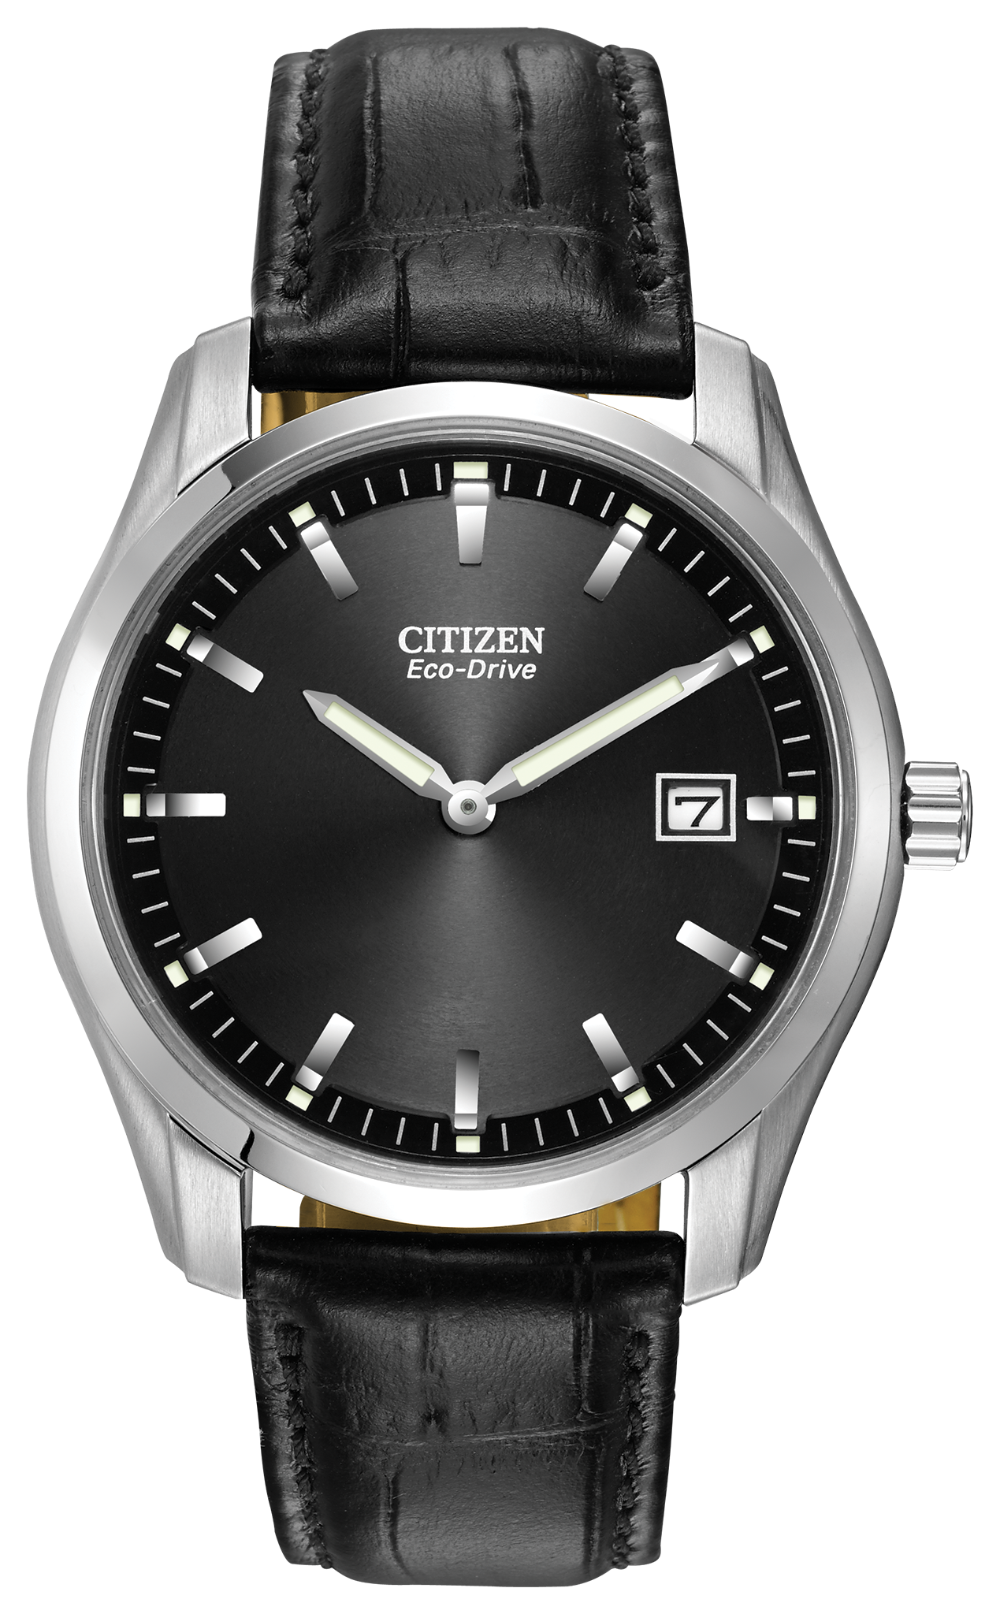 Gents Stainless Steel Citizen Eco-Drive Watch